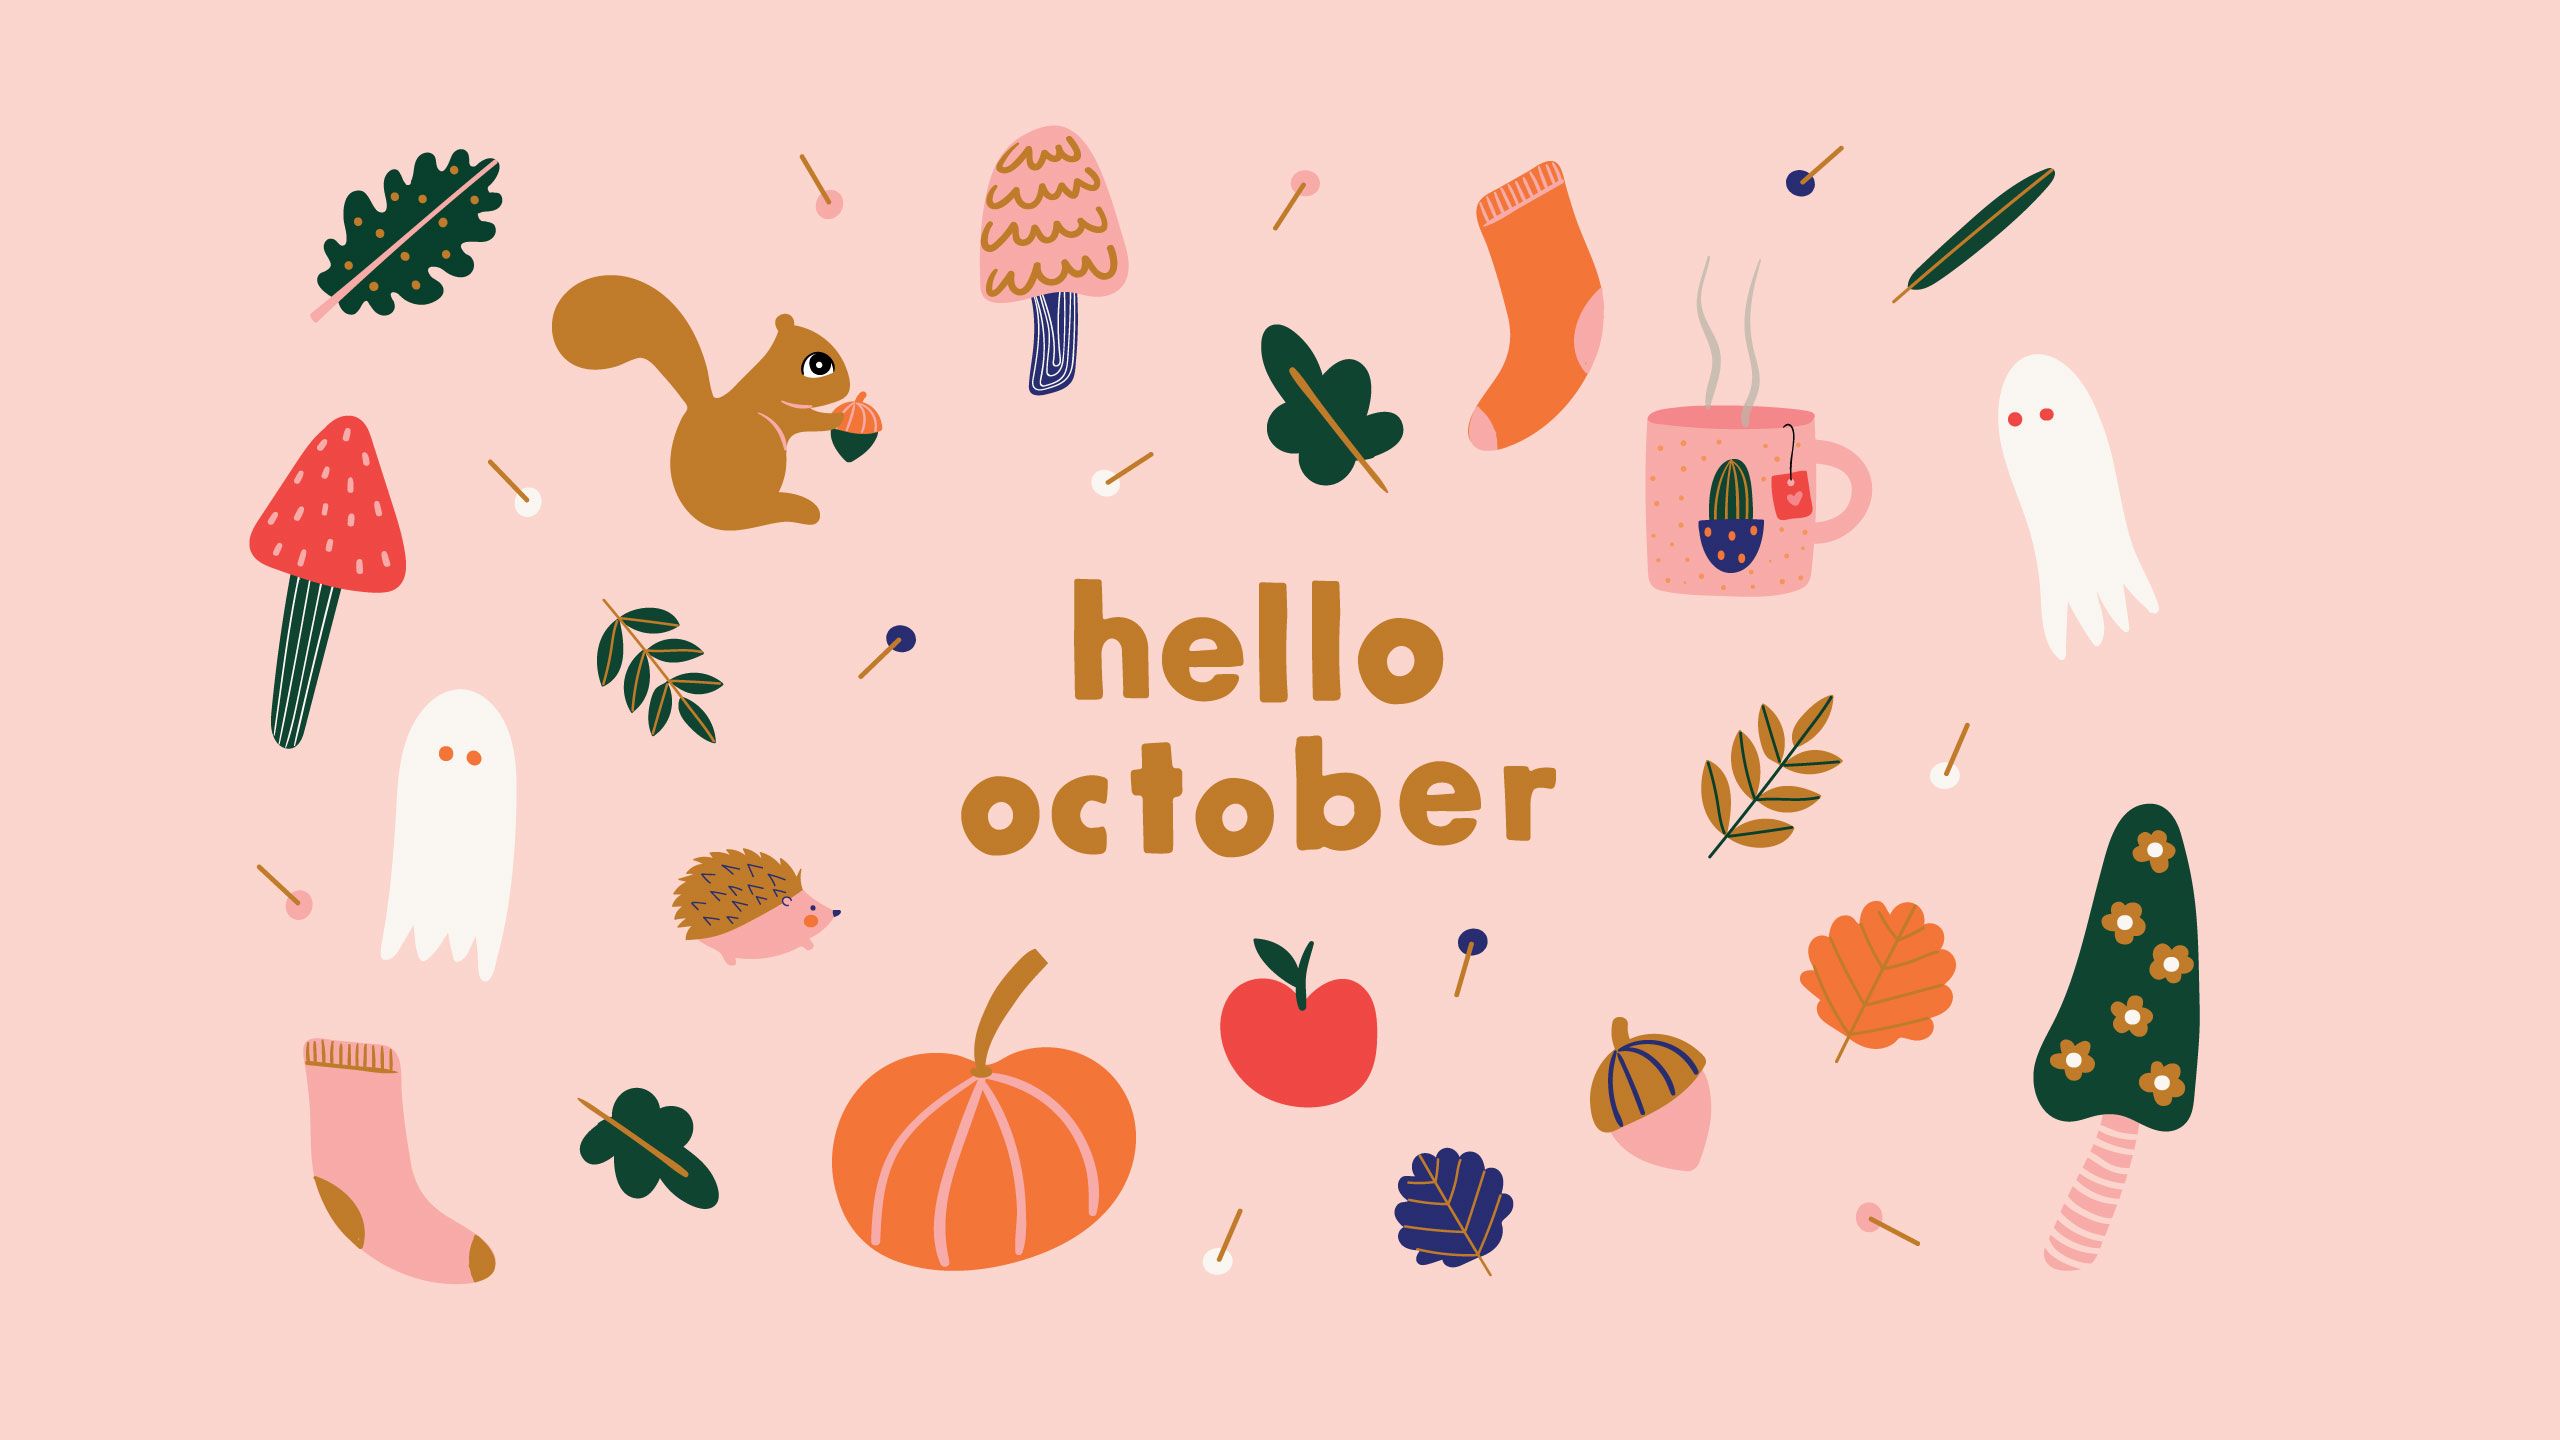 Hello october illustration with autumn leaves, pumpkins and other symbols - October